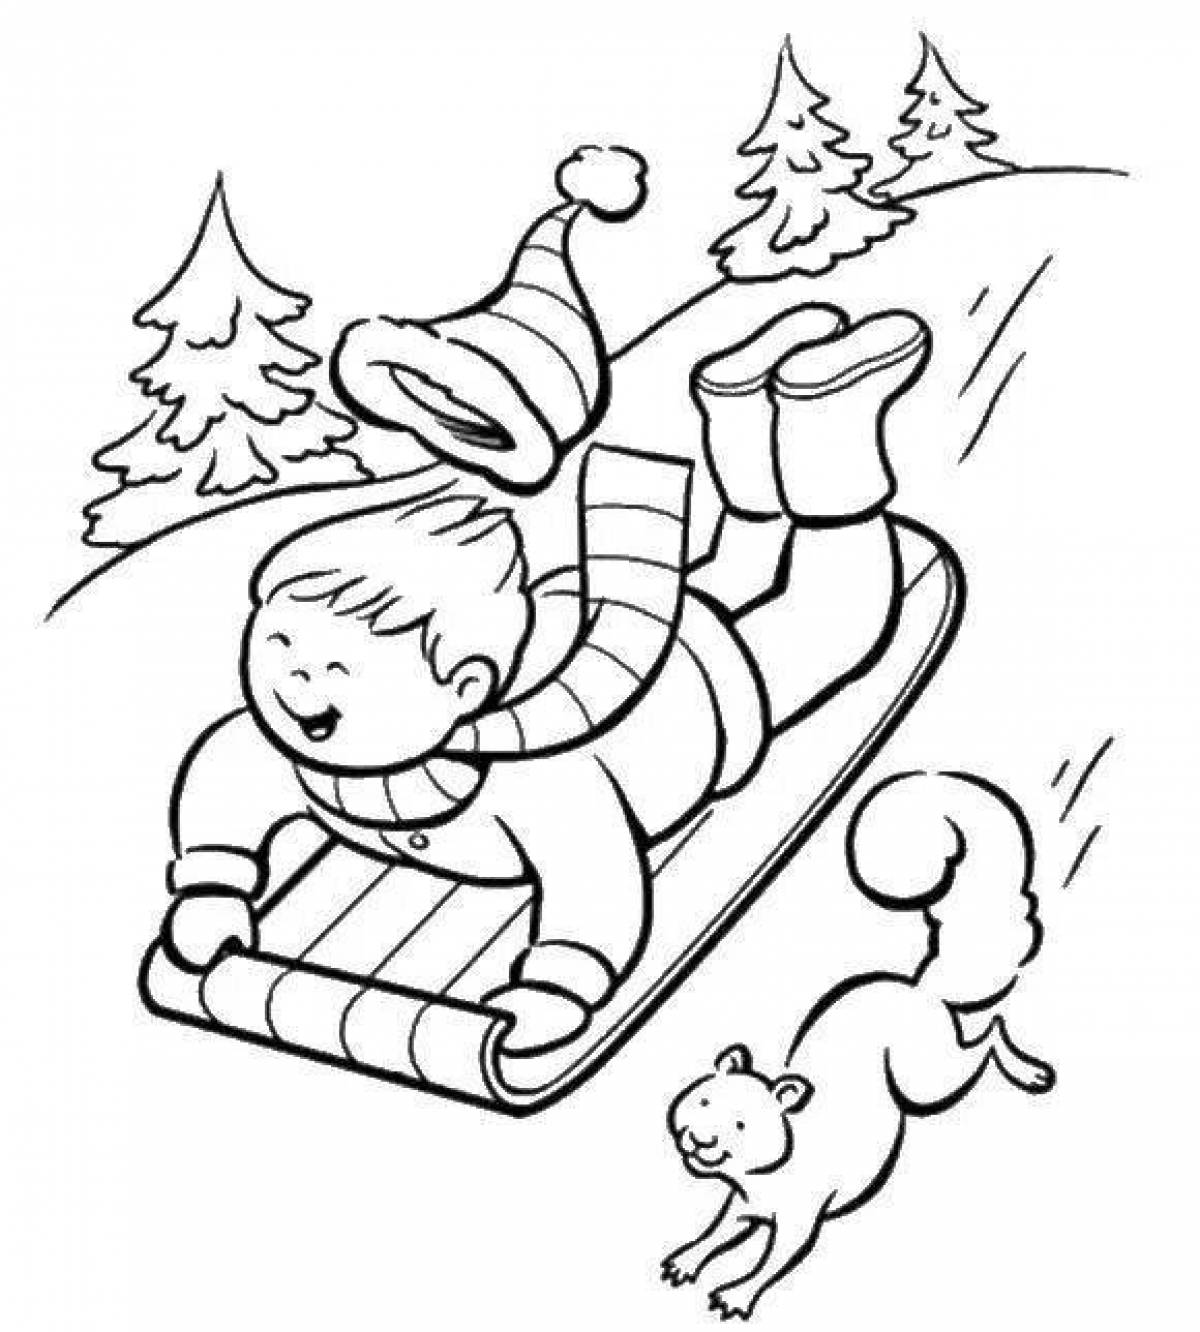 Colorful child on a sleigh coloring book